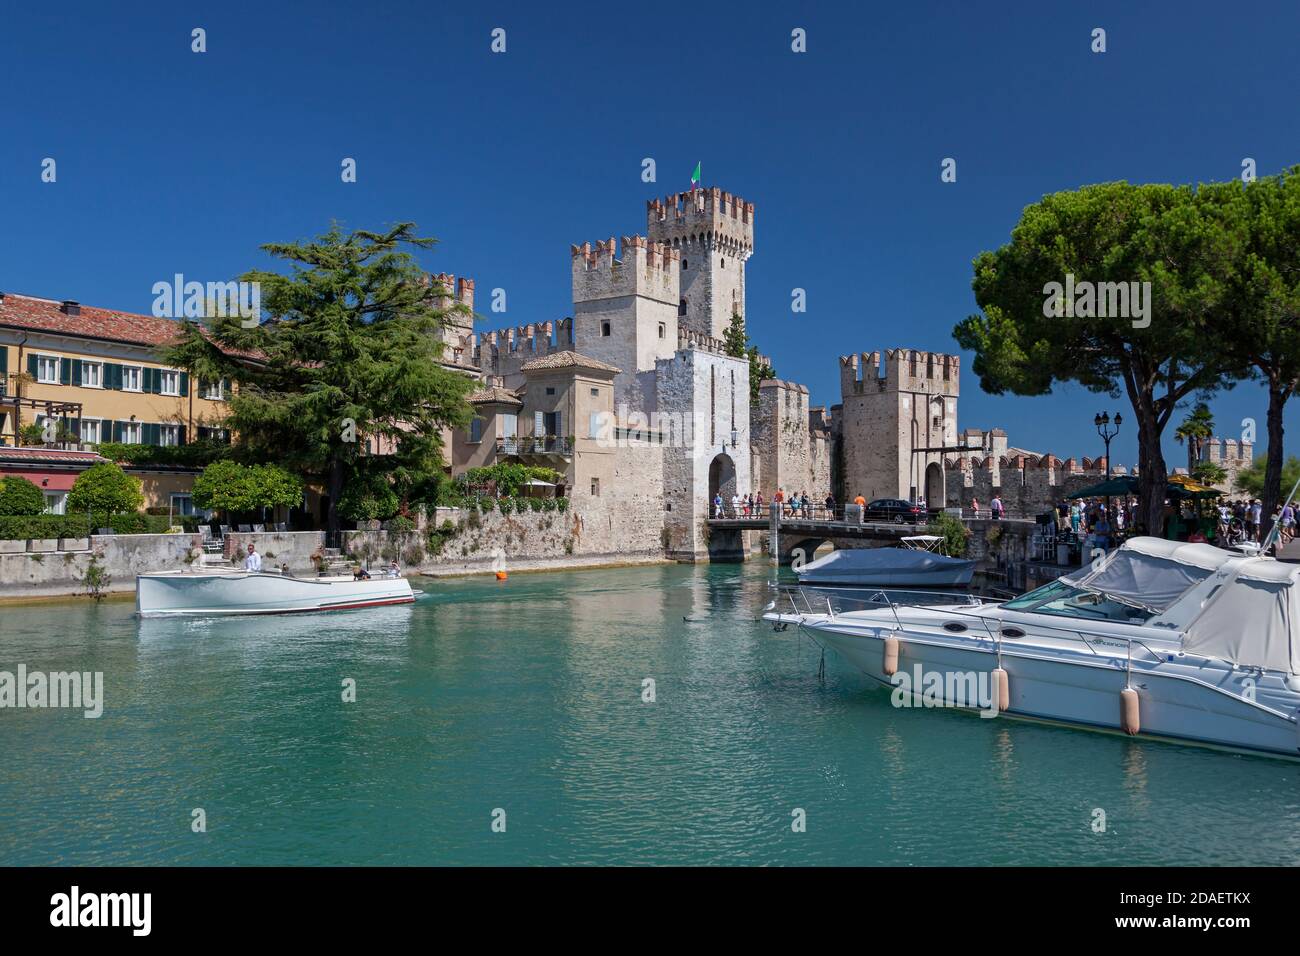 Geographie / Reisen, Italien, Lombardei, Sirmione, Gardasee, Hafen mit Castello Scaligero in Sirmione, Additional-Rights-Clearance-Info-not-available Stockfoto